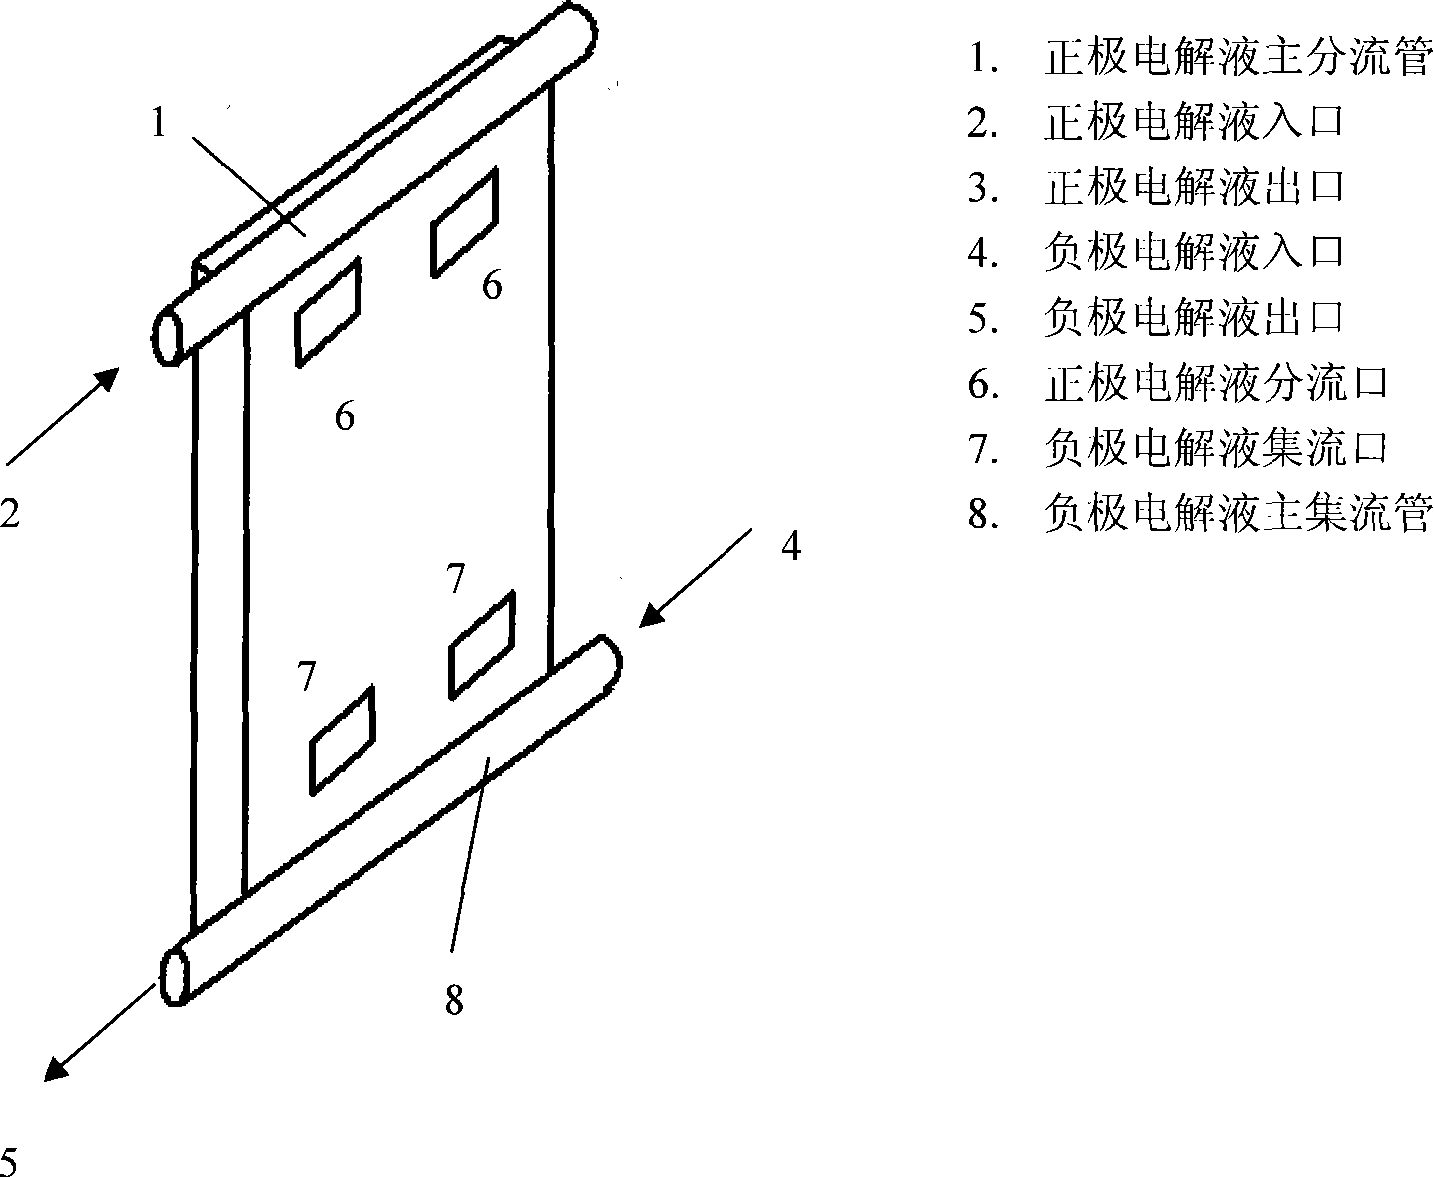 Large power redox flow cell device electric pile structure